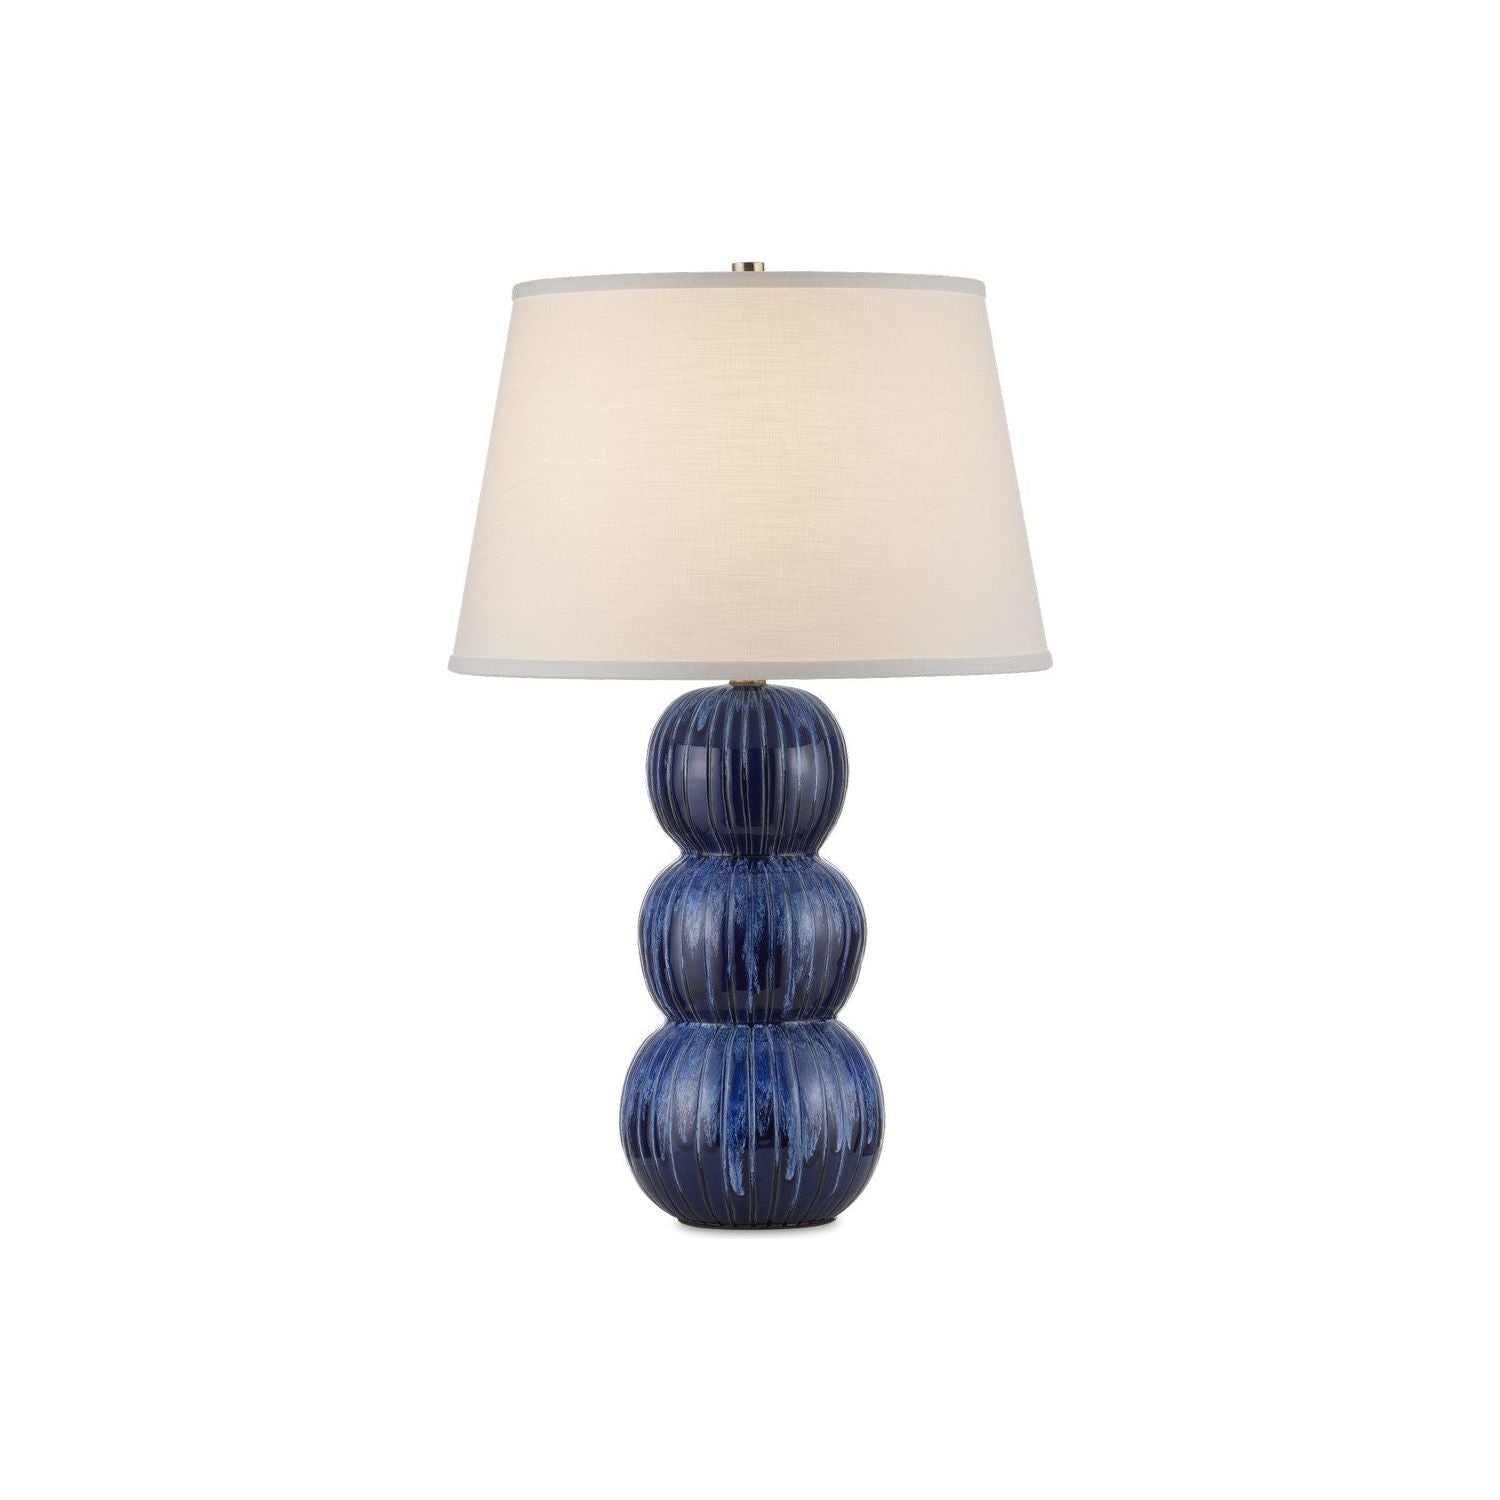 Currey and Company - 6000-0960 - One Light Table Lamp - Blue